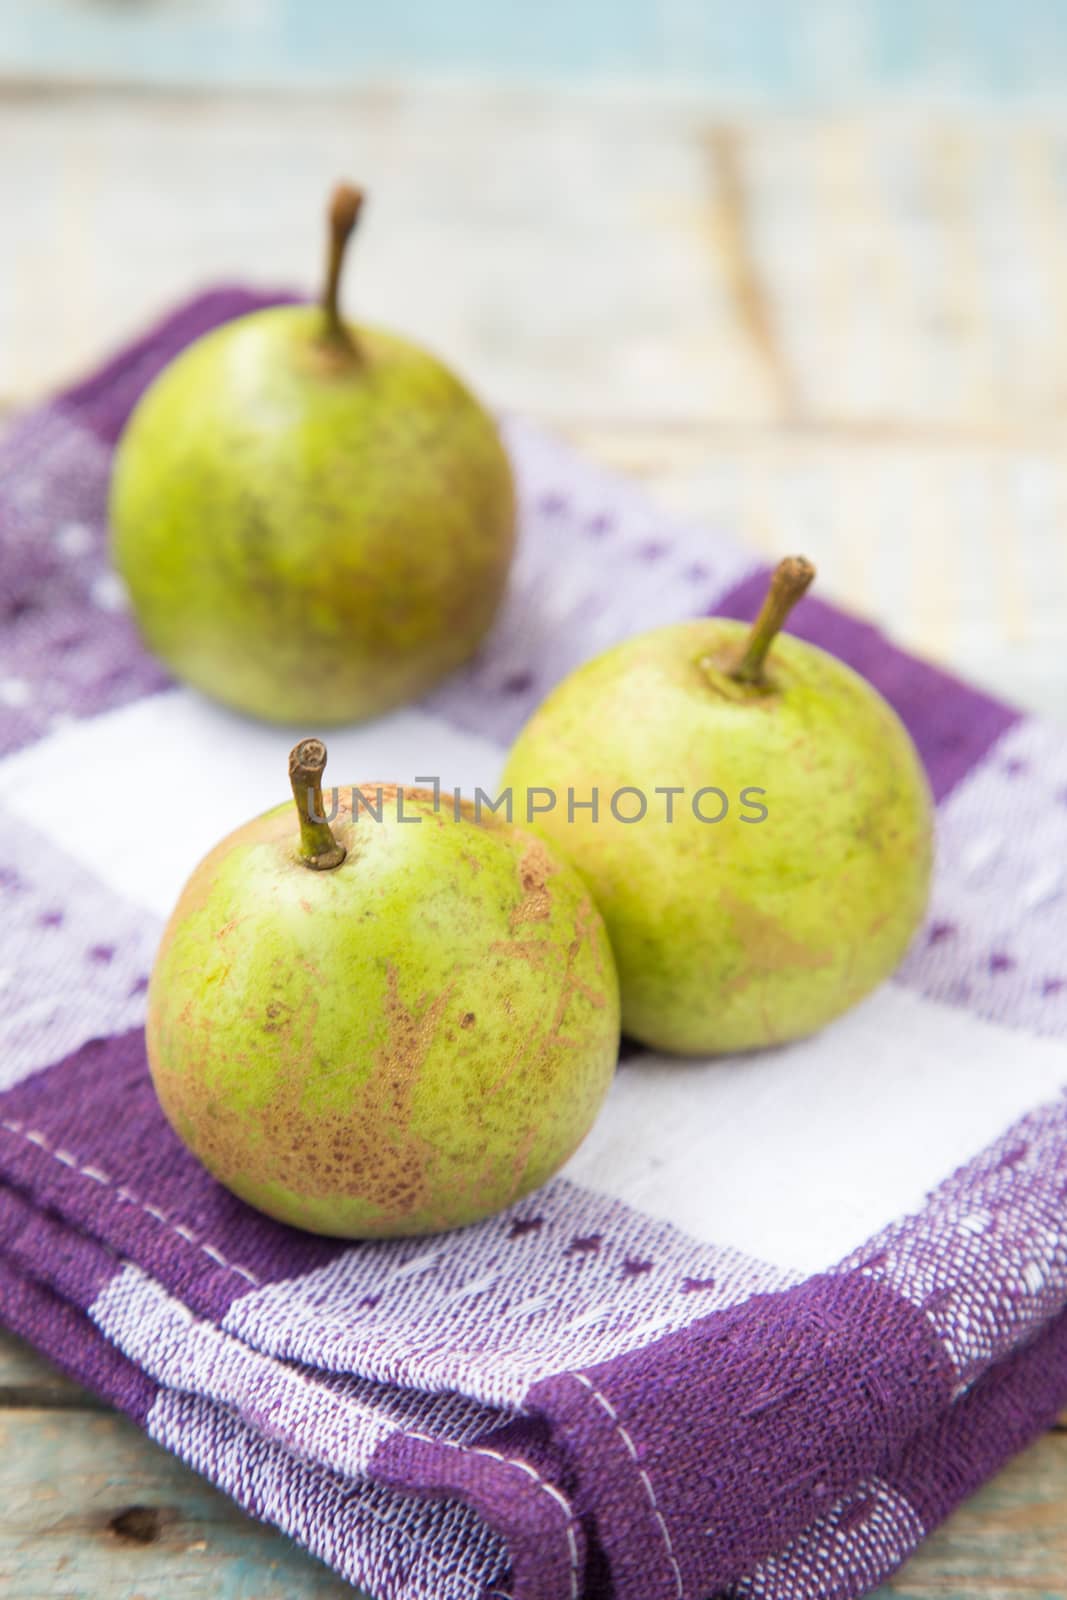 few fresh ripe pears are on a wooden surface